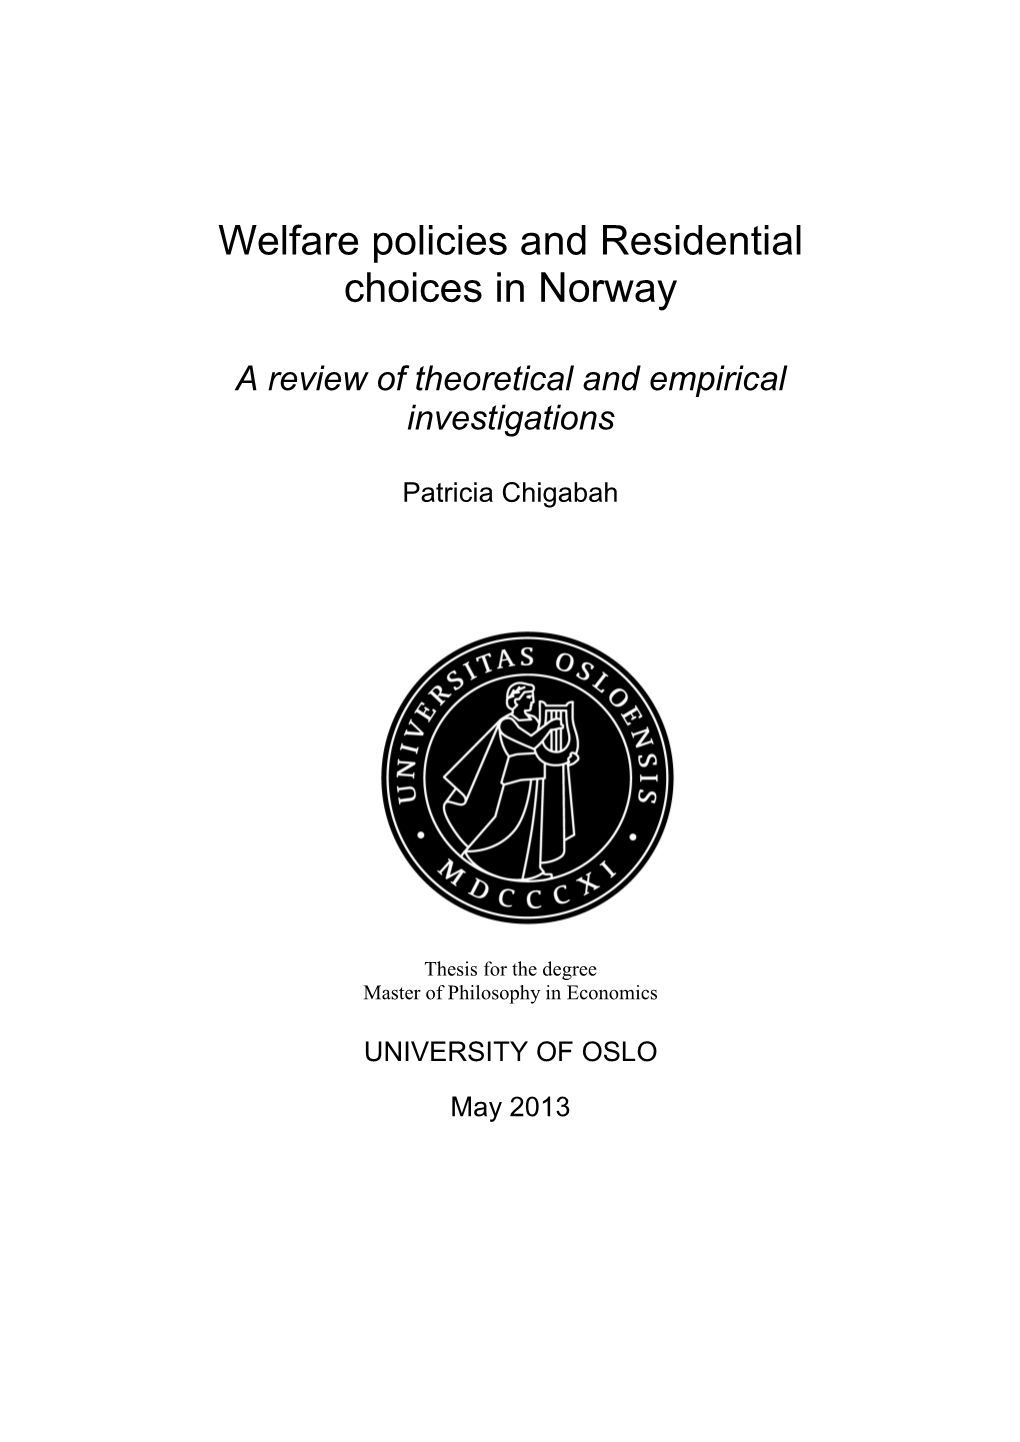 Welfare Policies and Residential Choices in Norway